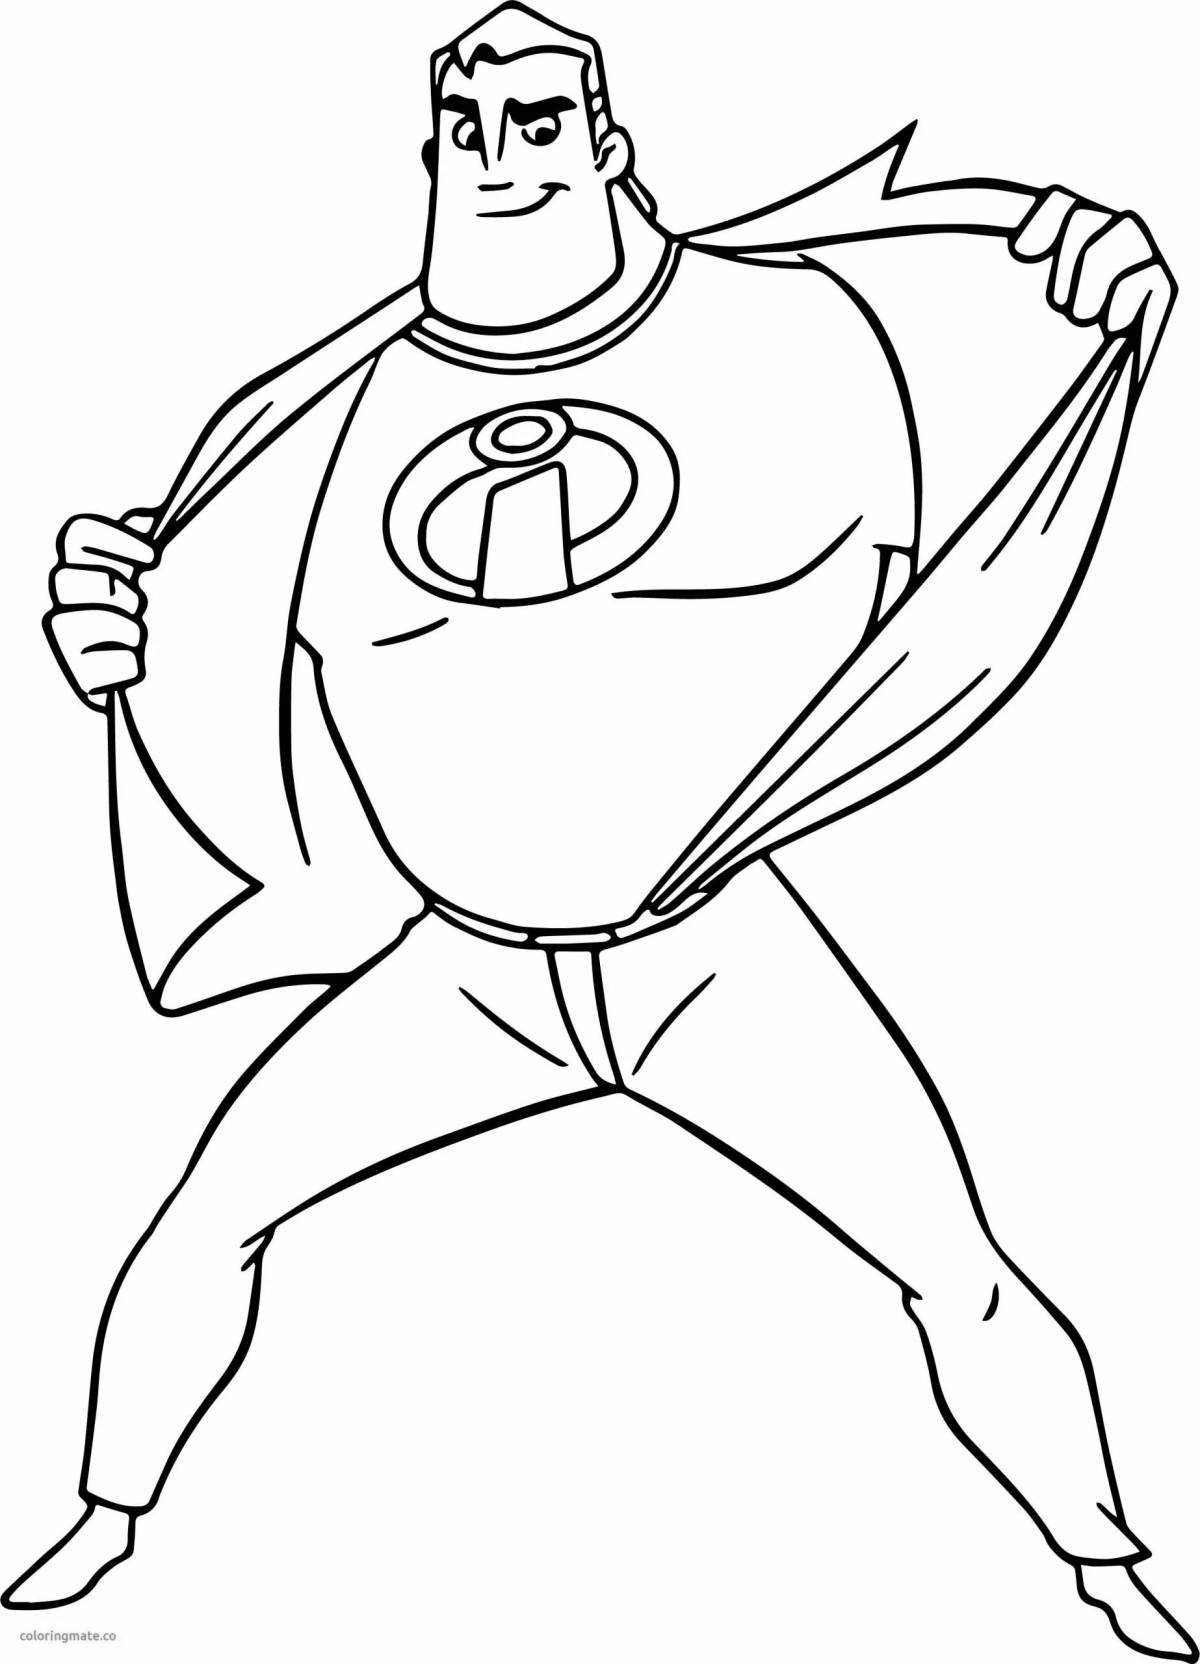 Adorable superman coloring page for 3-4 year olds